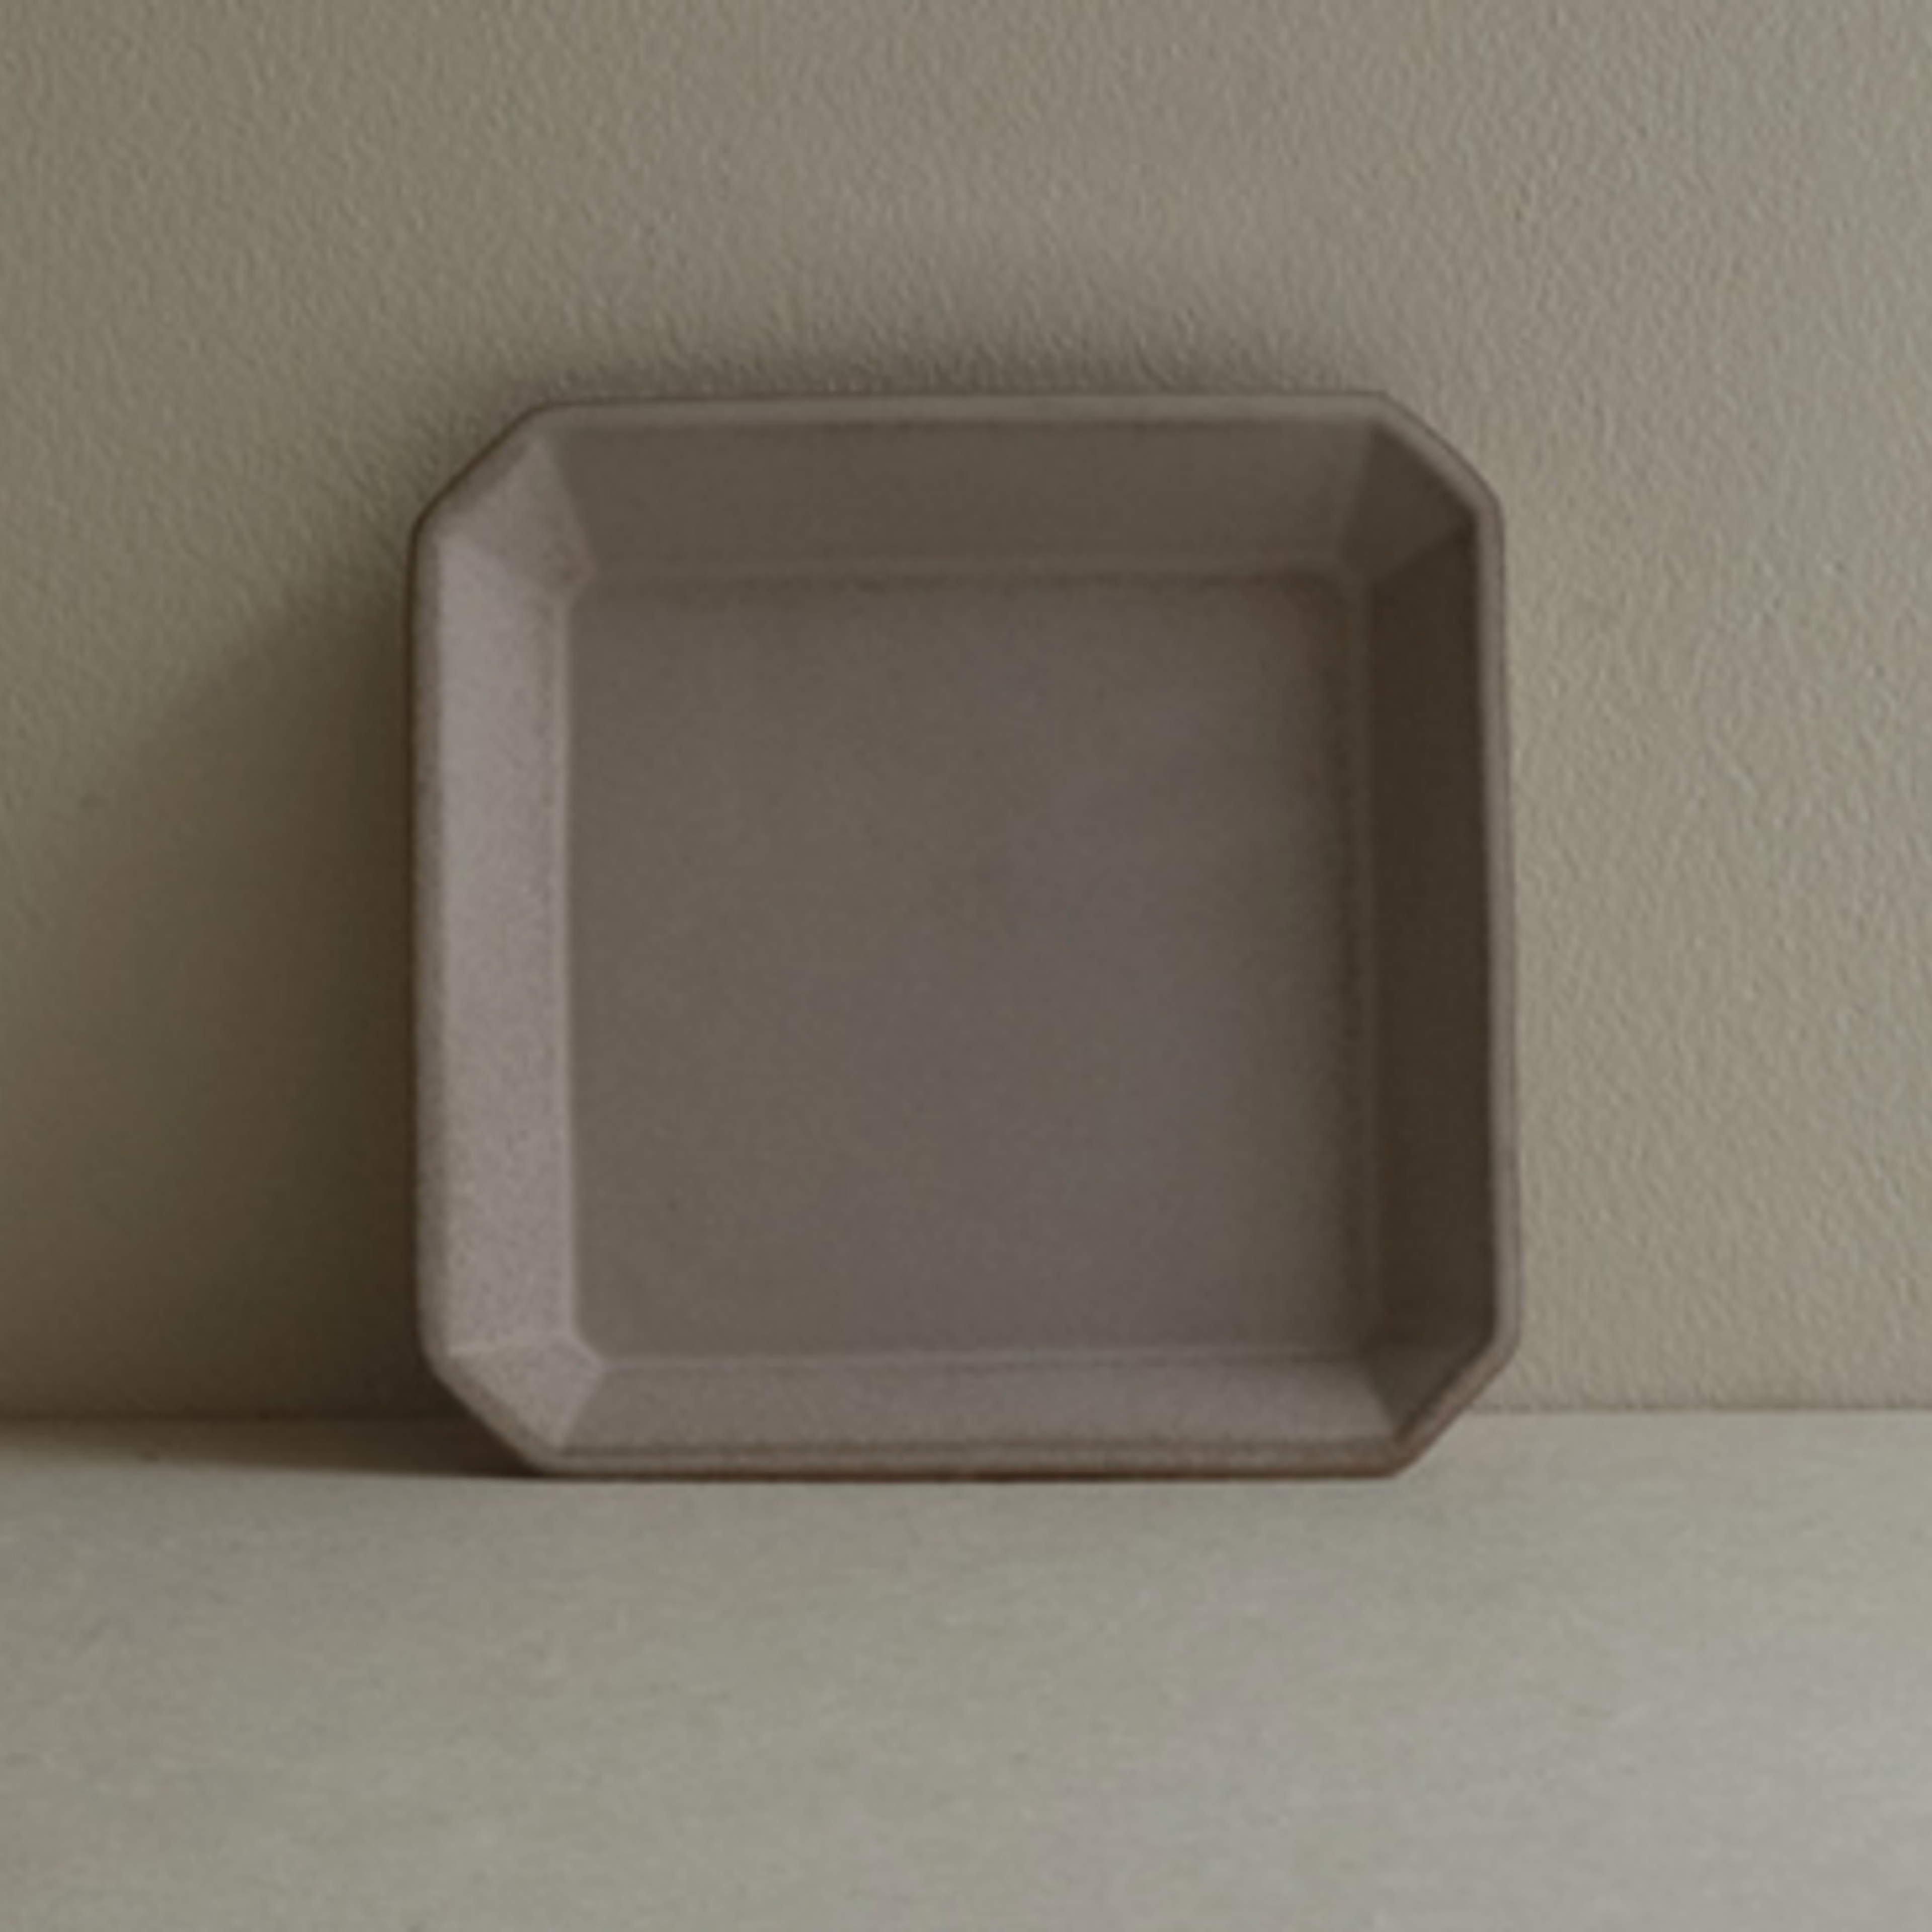 Square Octagonal Plate - Small